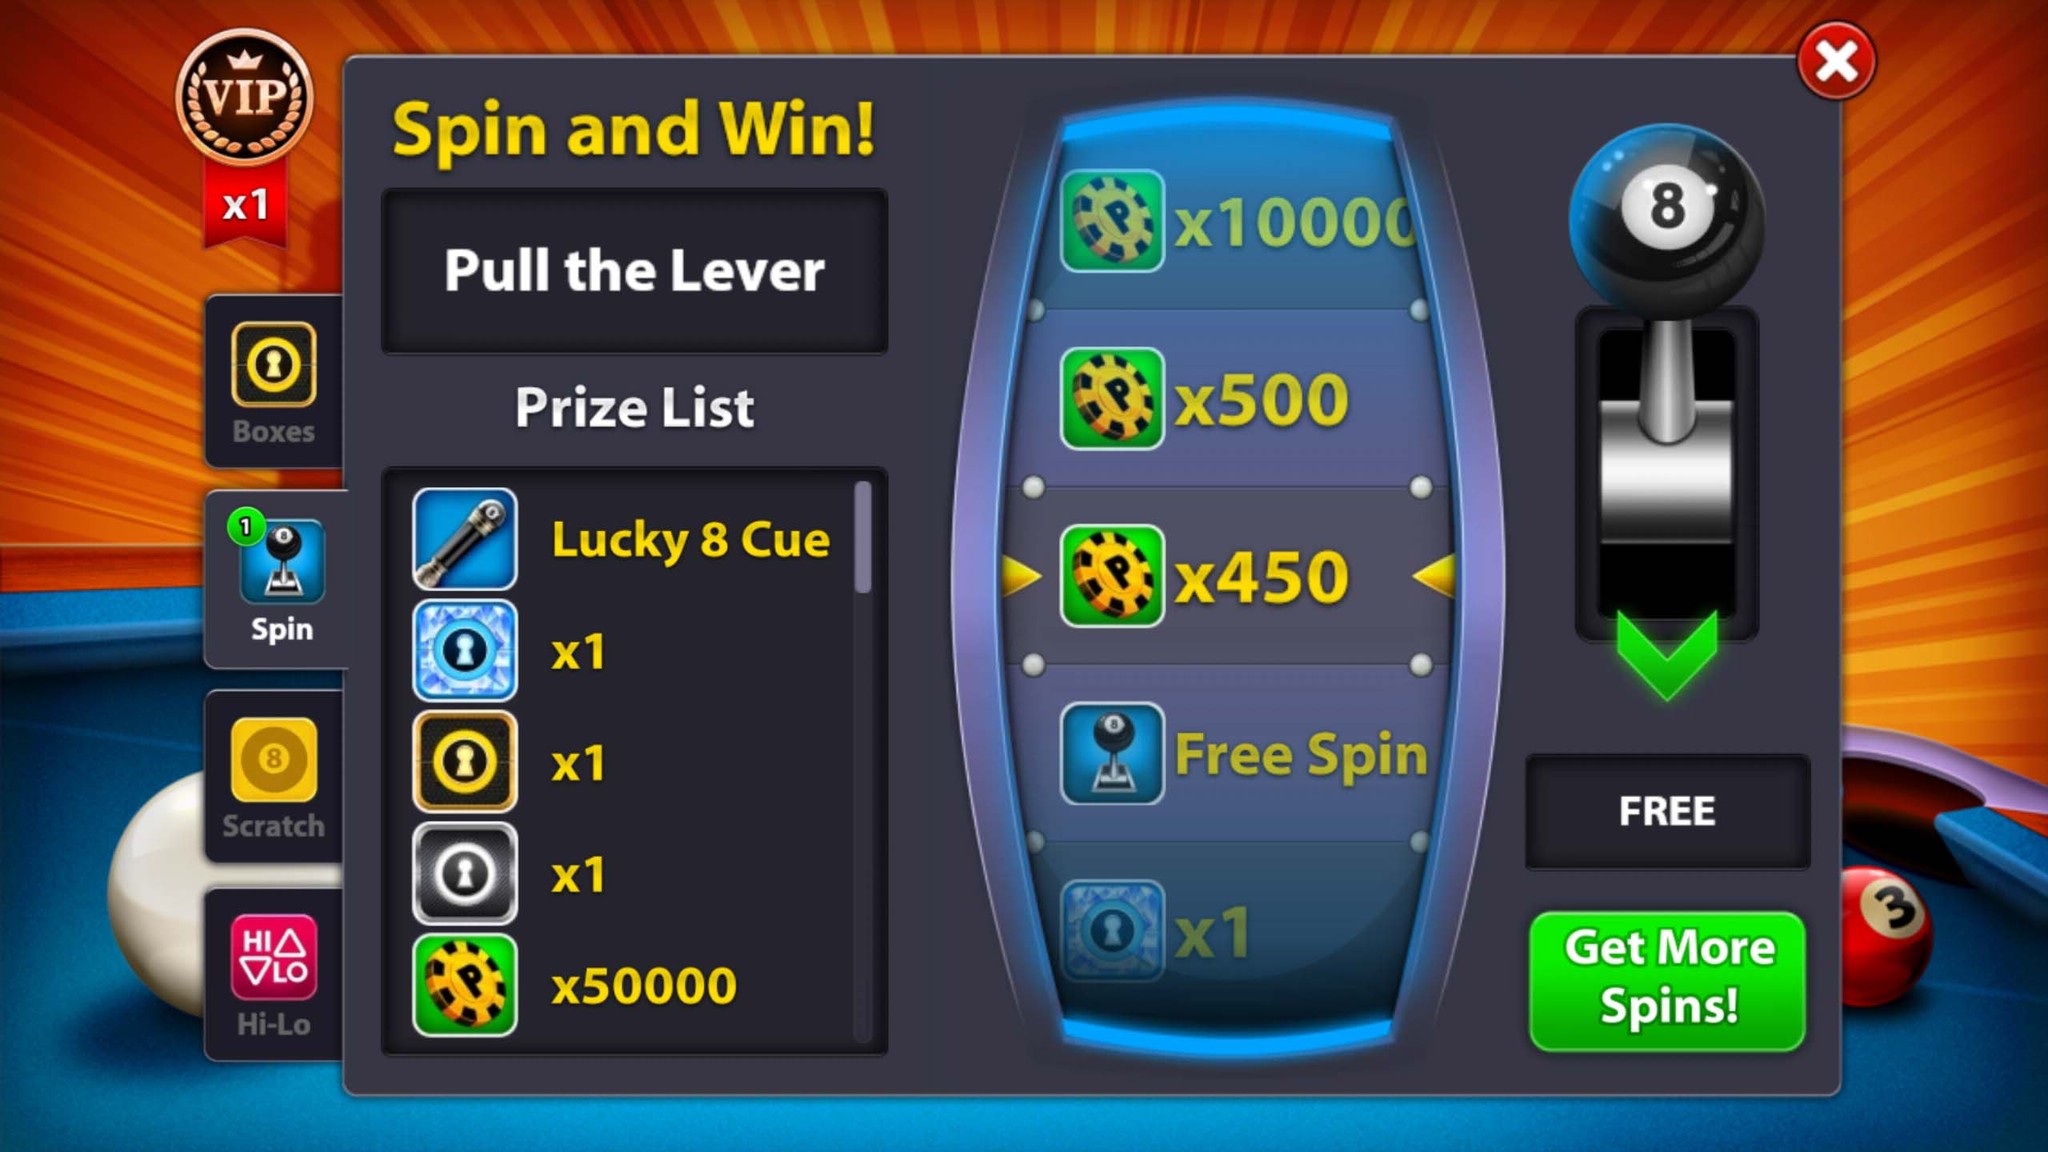 Grand Heist-Spin &win and Golden Spin 8 Ball Pool. Spin and win. 8 Ball Pool Play a Golden Spin. Где находится Spin and win в 8 Ball Pool.